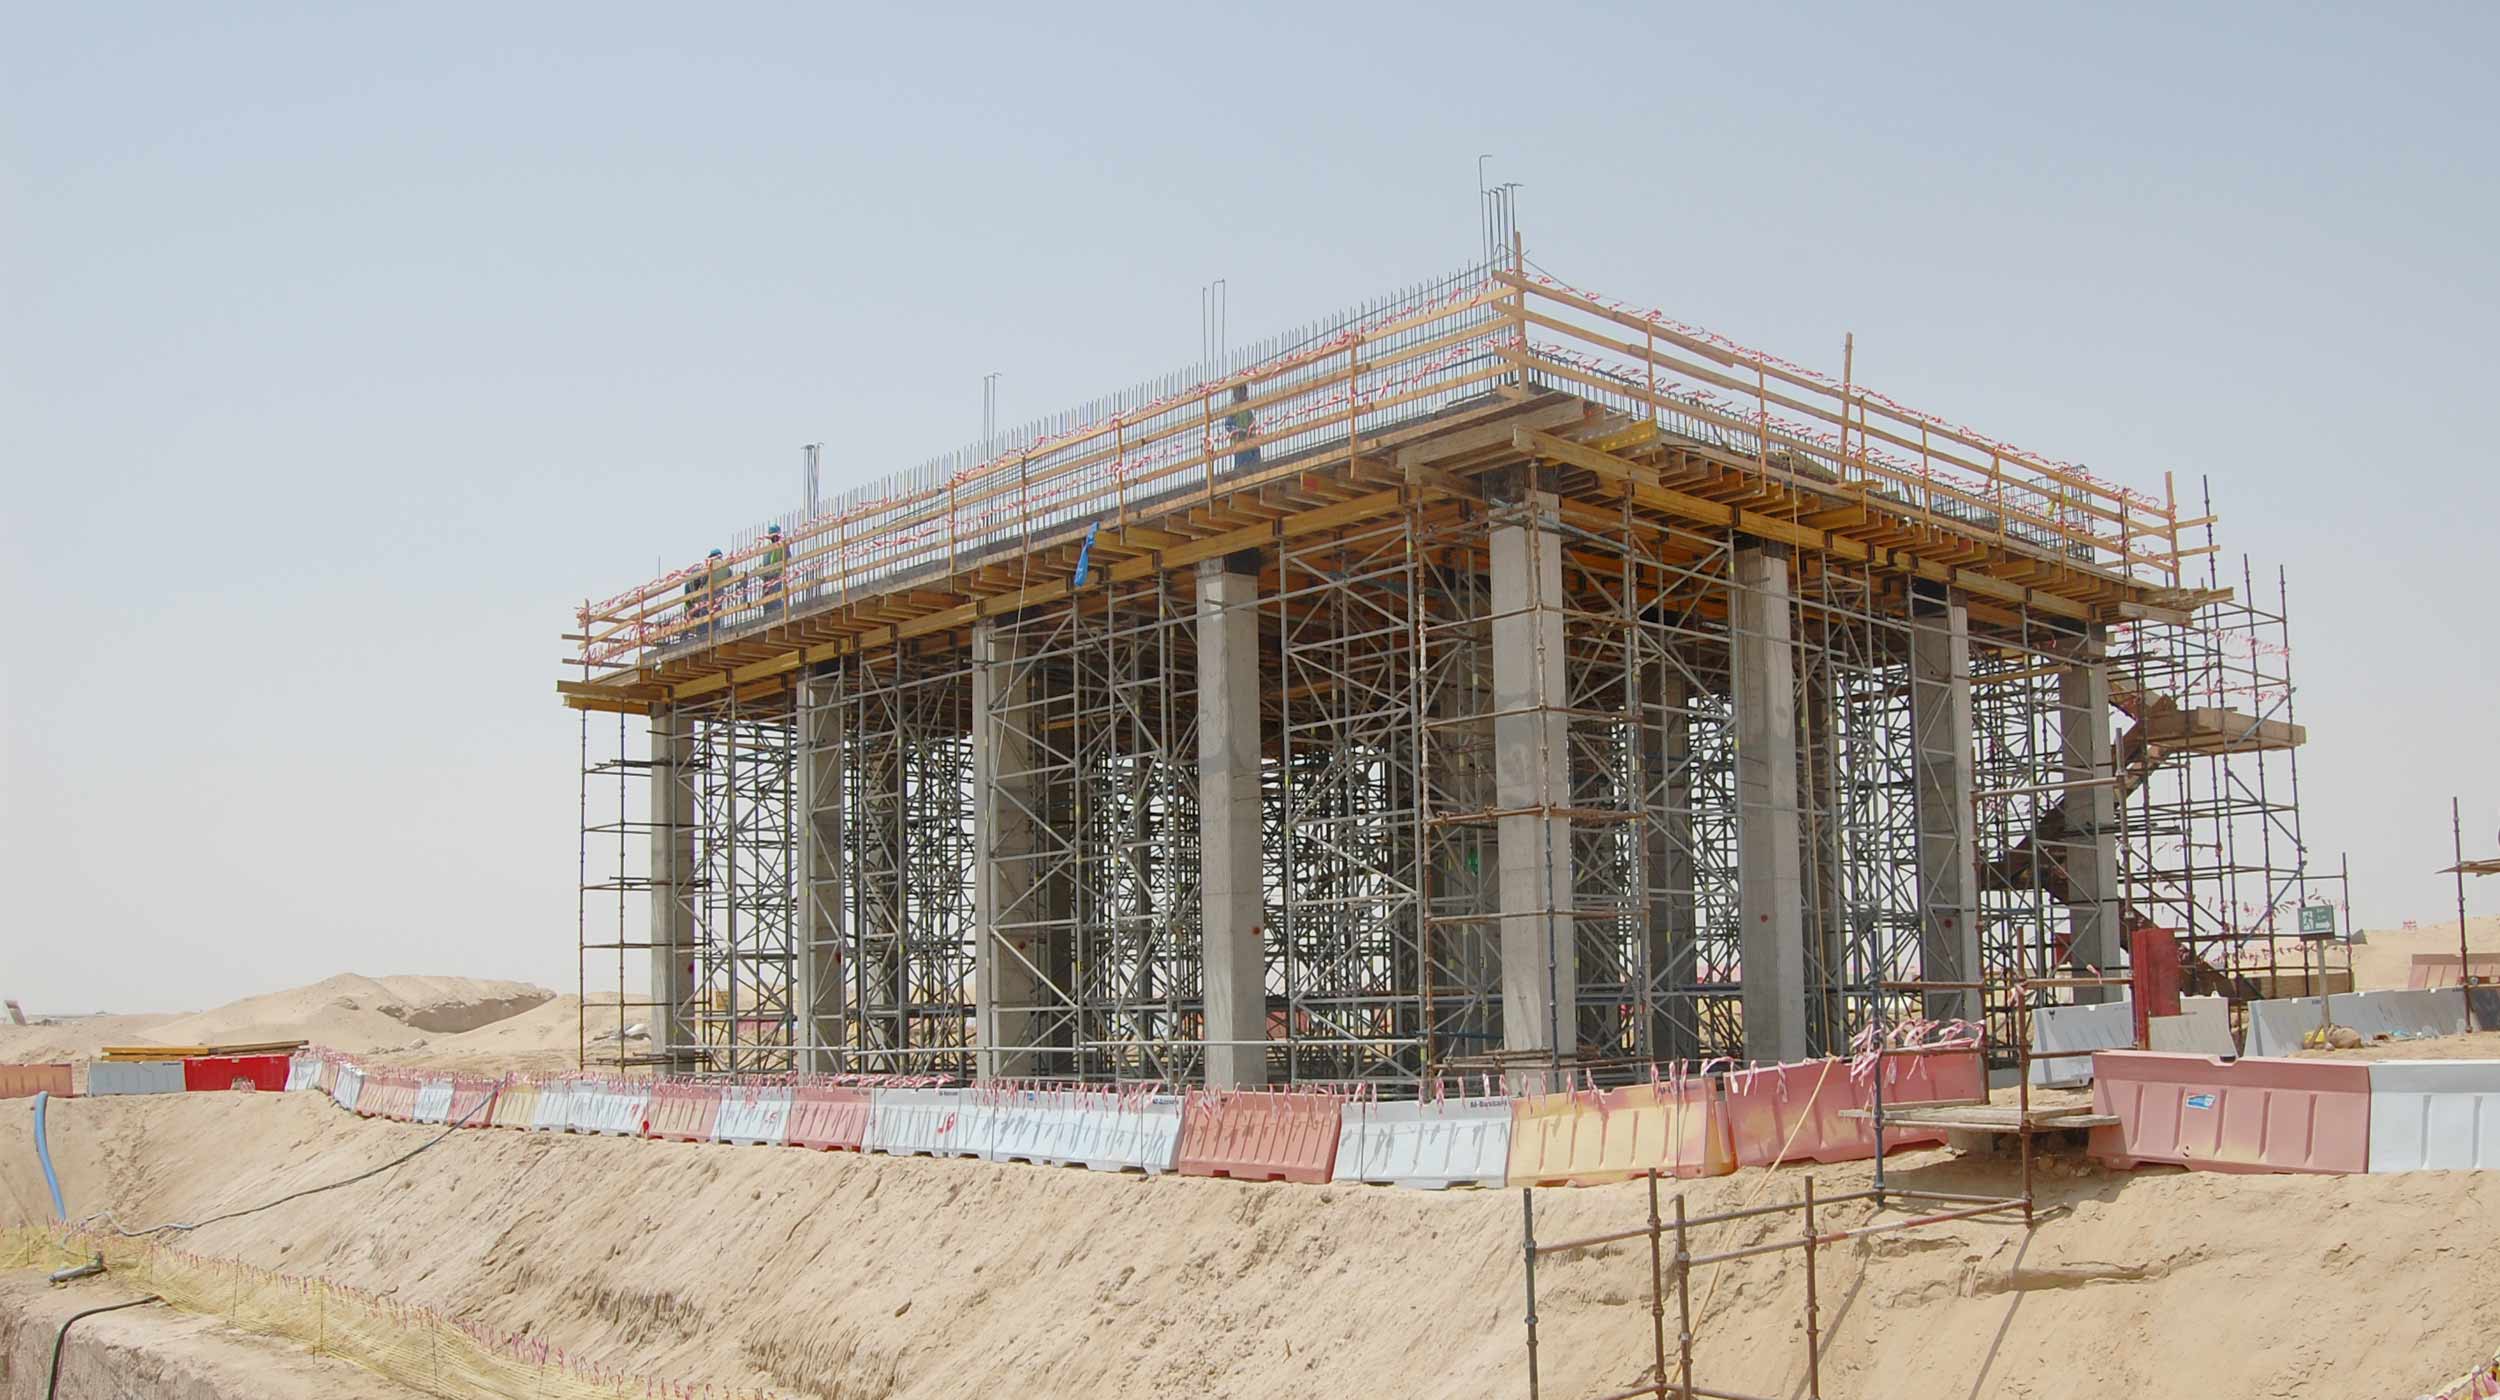 The Jebel Ali Sewage Pumping Station in Dubai has an area of 300 m², with walls between 2.2 m and 7.3 m high and 25 cm thick slabs.